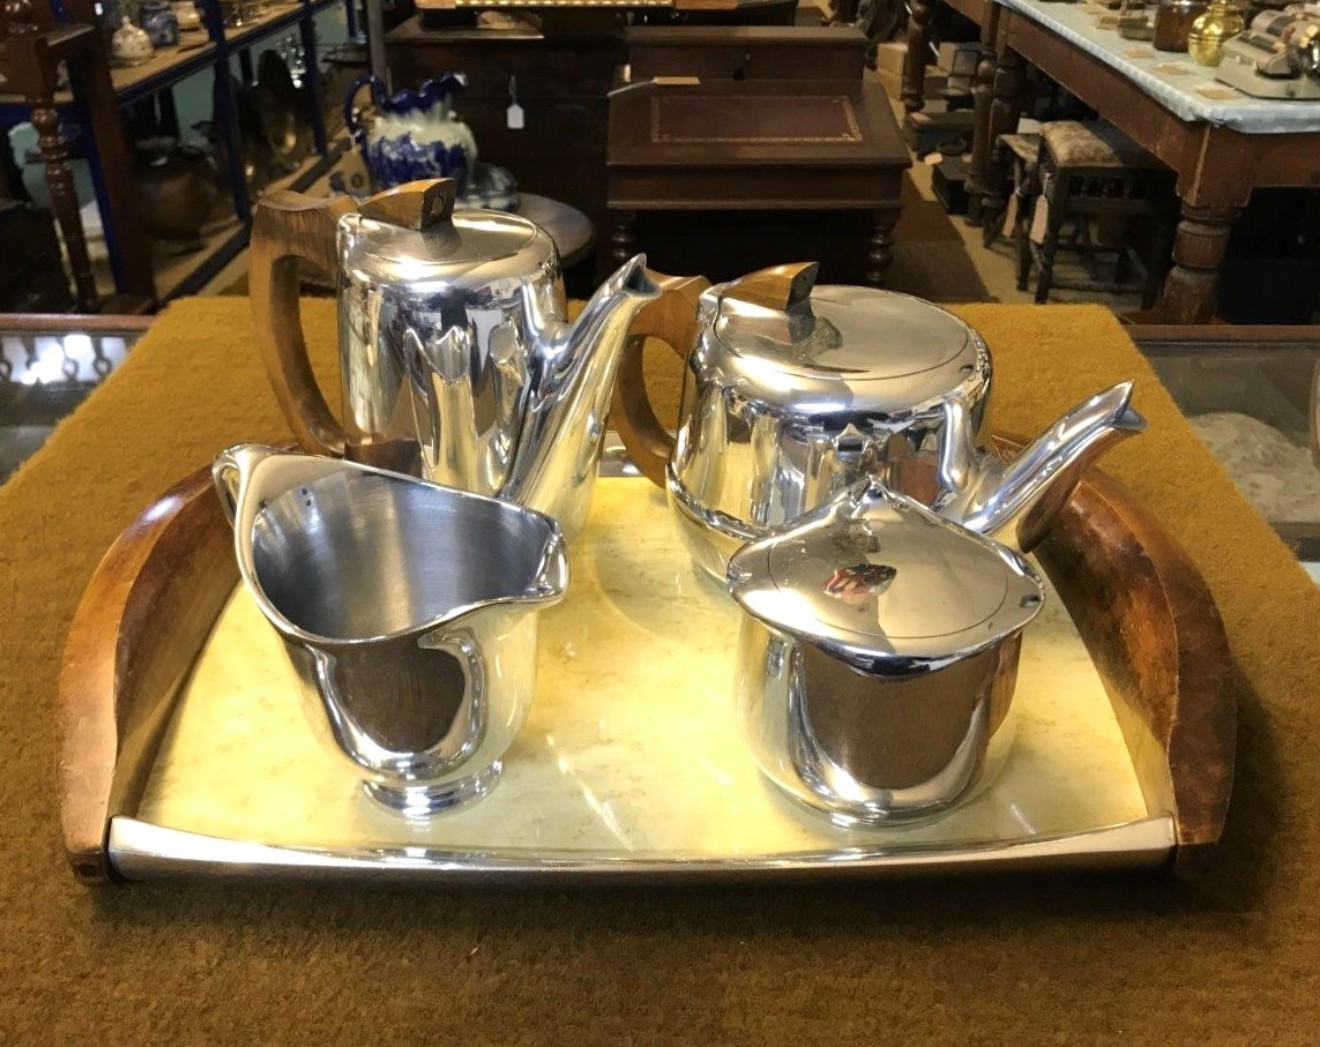 Piquot Ware Tea / Coffee Set with Tray